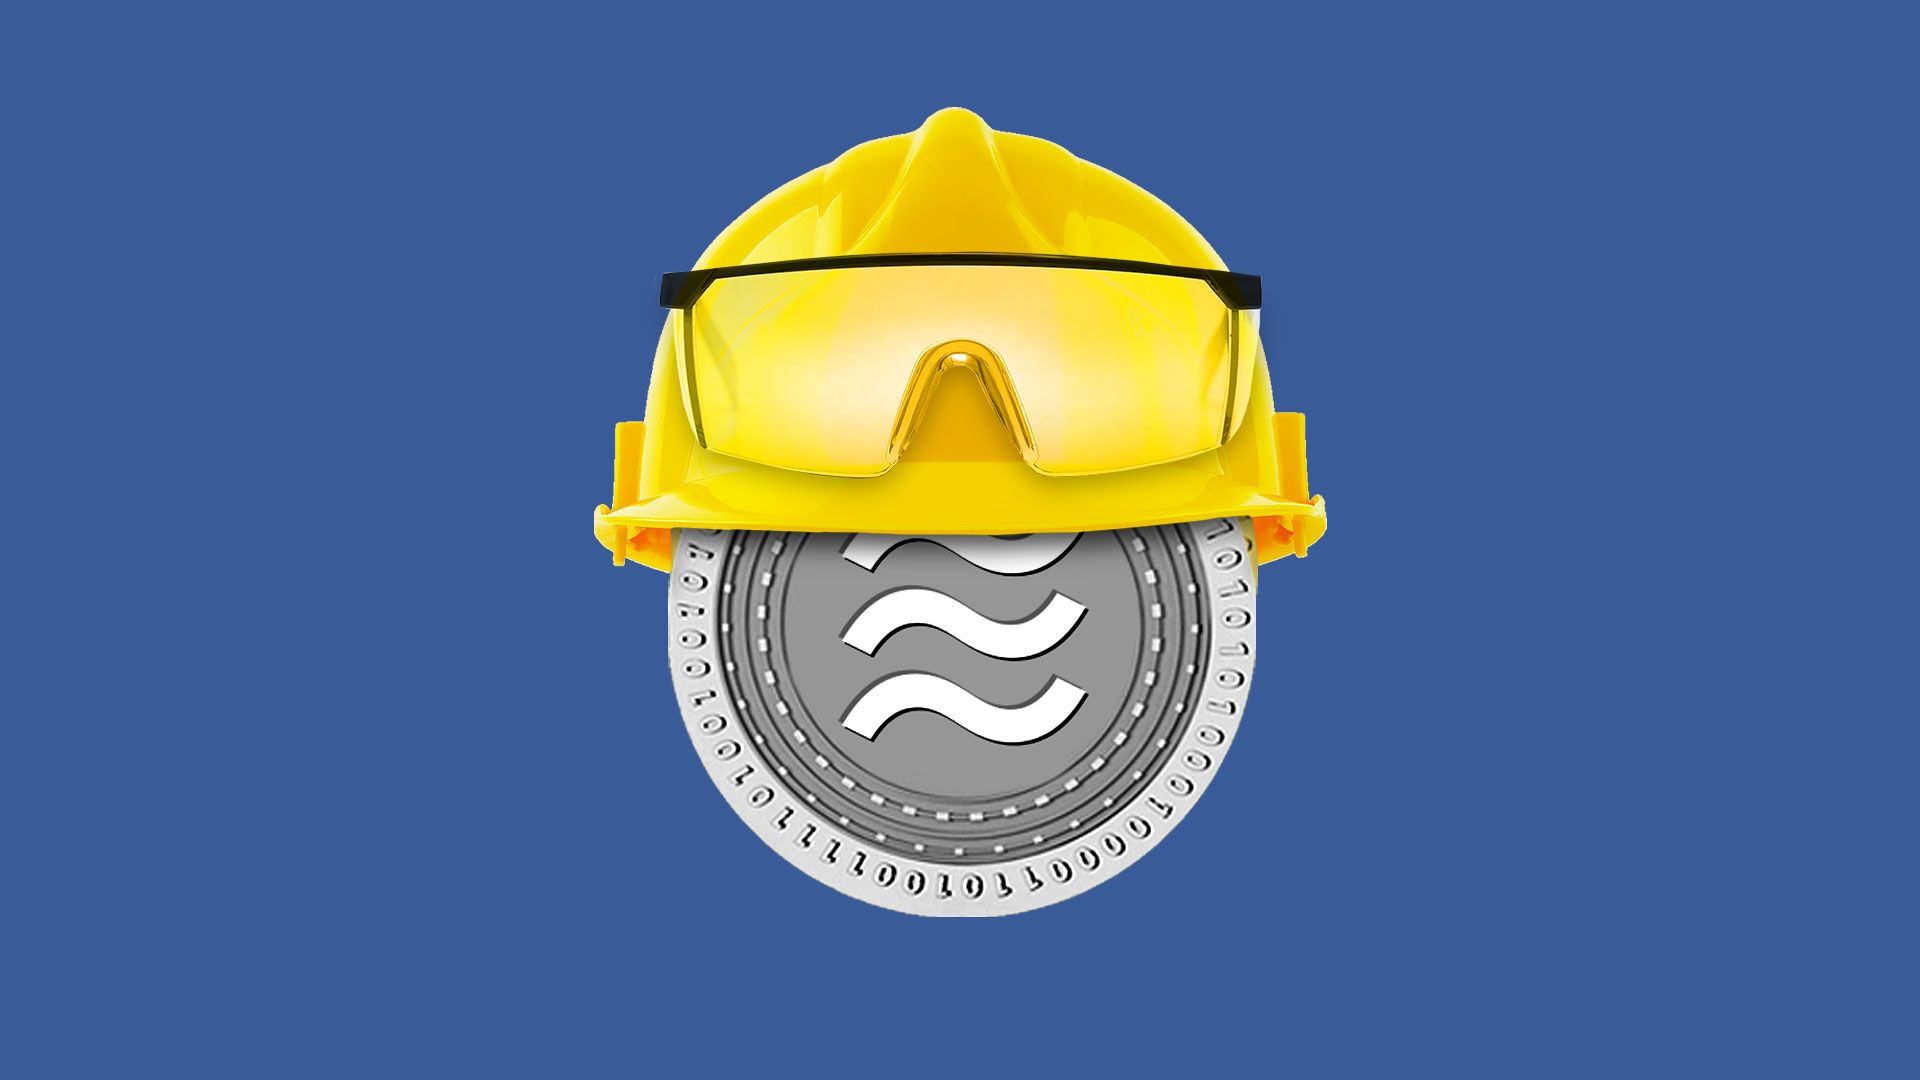  Illustration of a Libra coin wearing a hard hat and safety glasses.